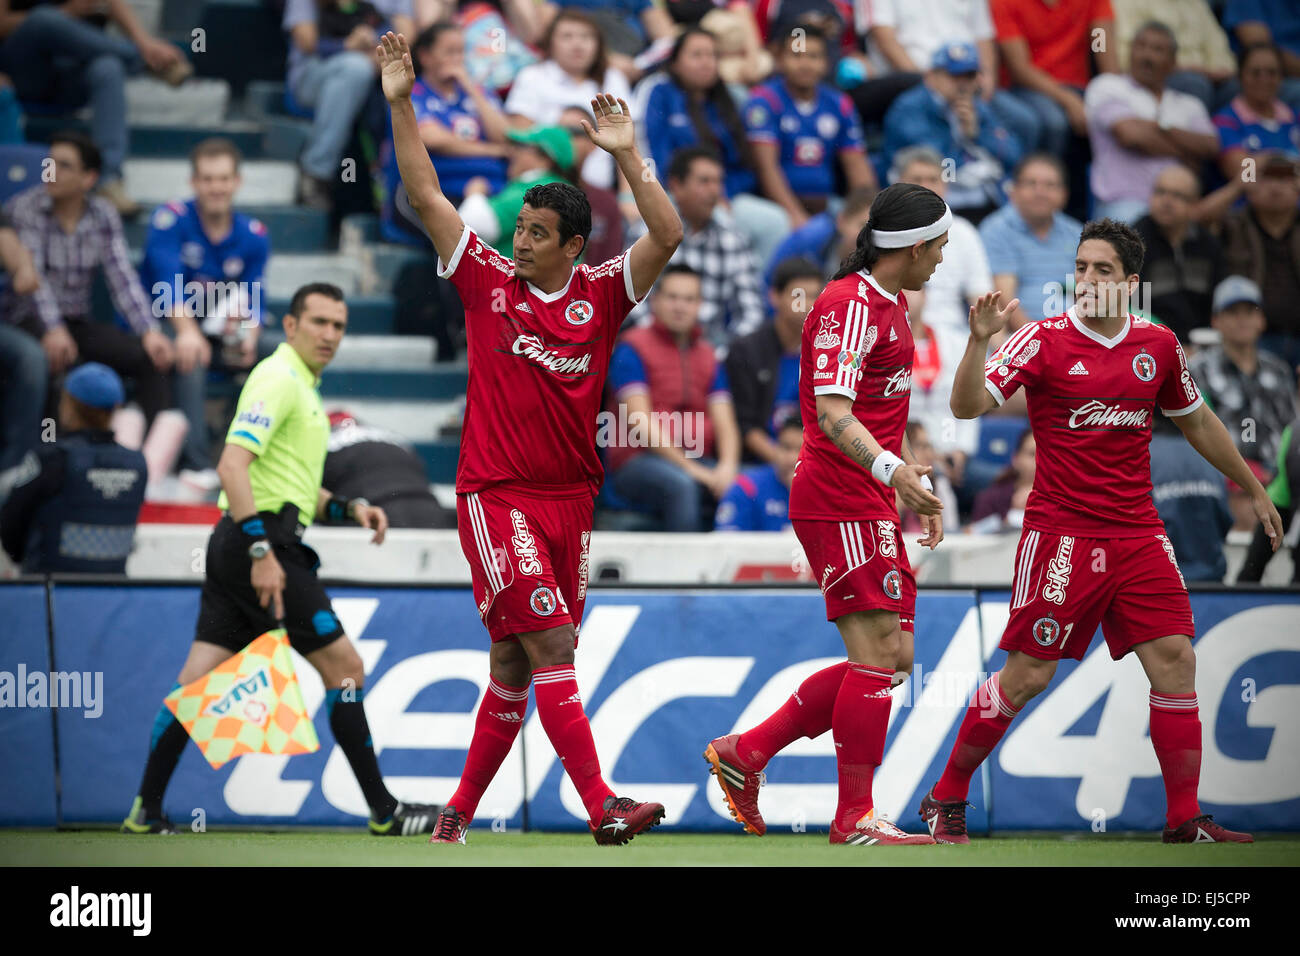 Mexico City, Mexico. 21st Mar, 2015. Alfredo Moreno (L) of Xolos celebrates his scoring during the match of 2015 Closing Tournament of MX League against Cruz Azul, in the Azul Stadium, in Mexico City, capital of Mexico, on March 21, 2015. © Alejandro Ayala/Xinhua/Alamy Live News Stock Photo